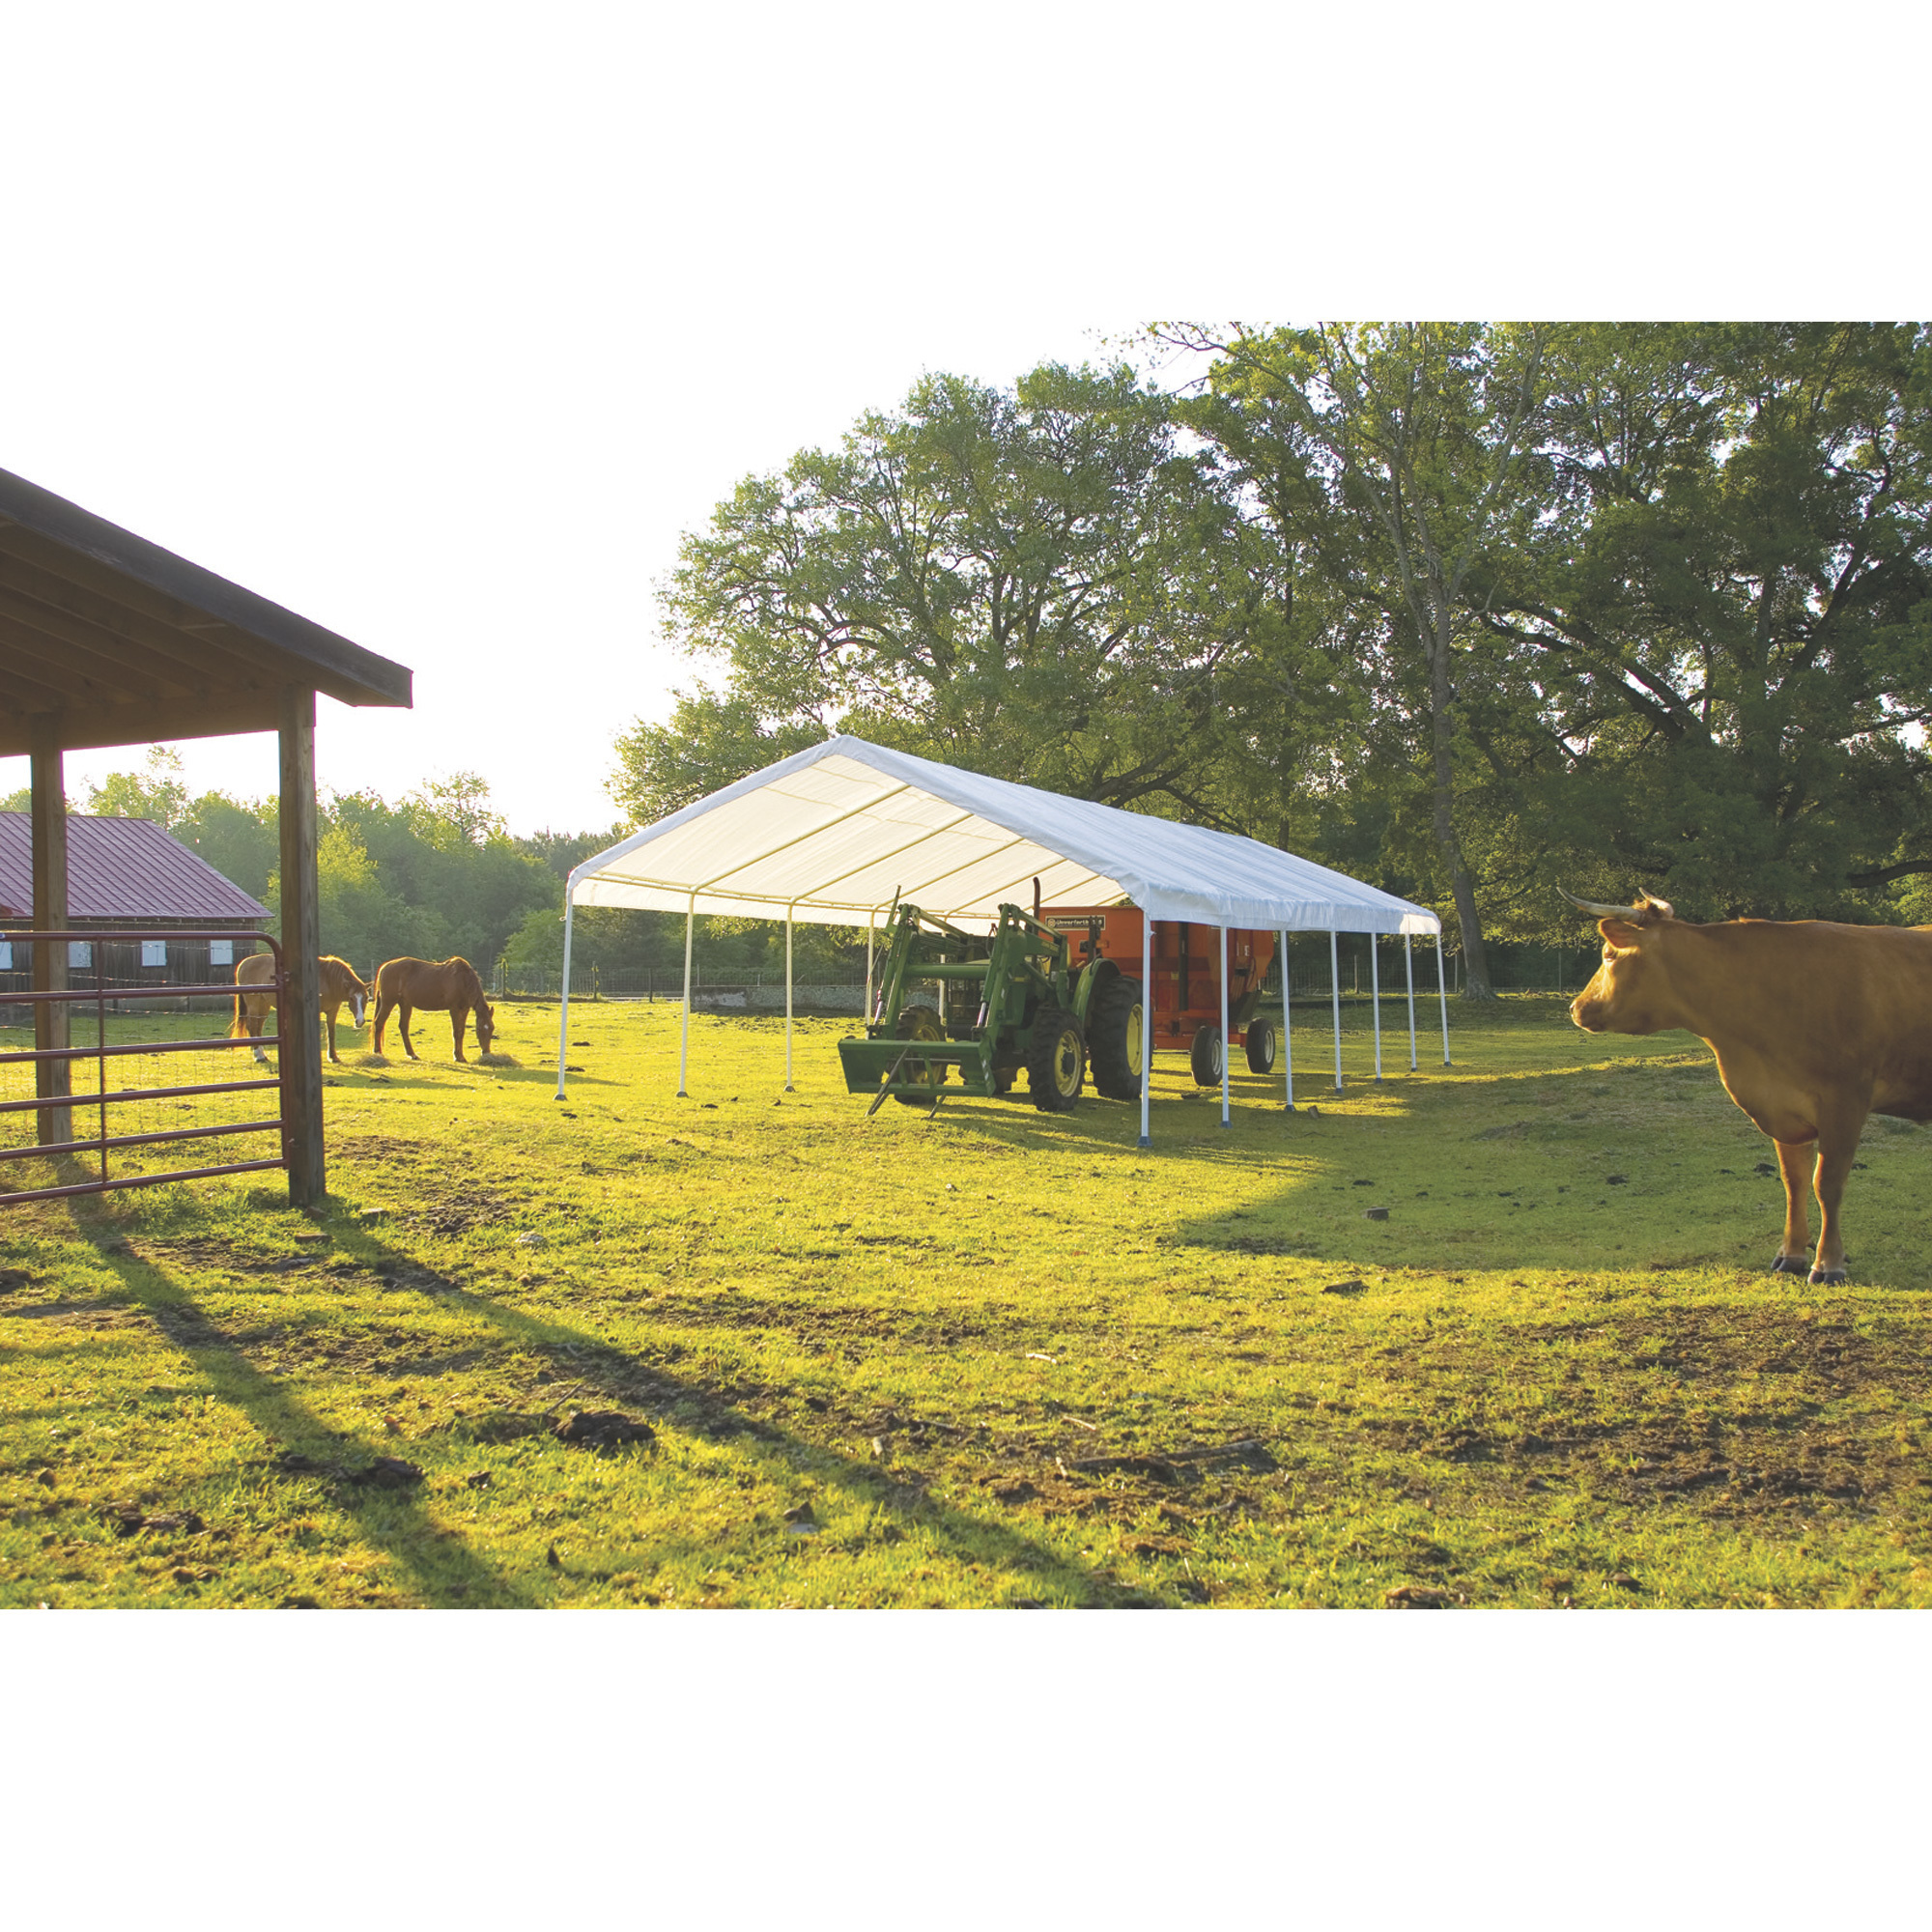 ShelterLogic Super Max Commercial Outdoor Canopy, 40ft.L x 18ft.W x 11ft.H, Model 26764